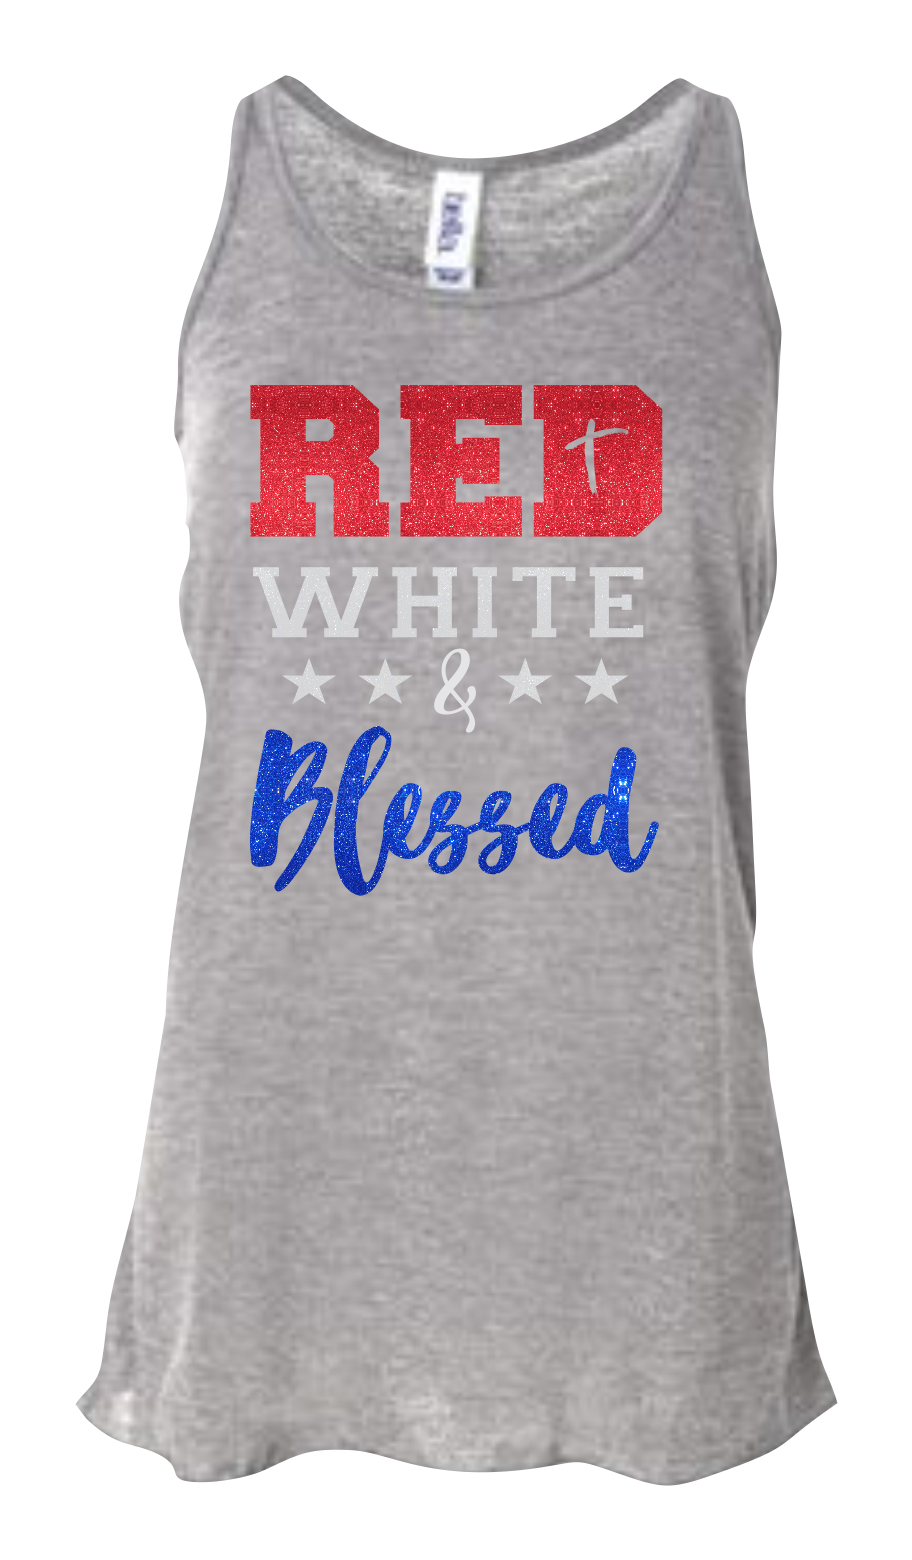 Red White & Blessed Women's Flowy Tank Top